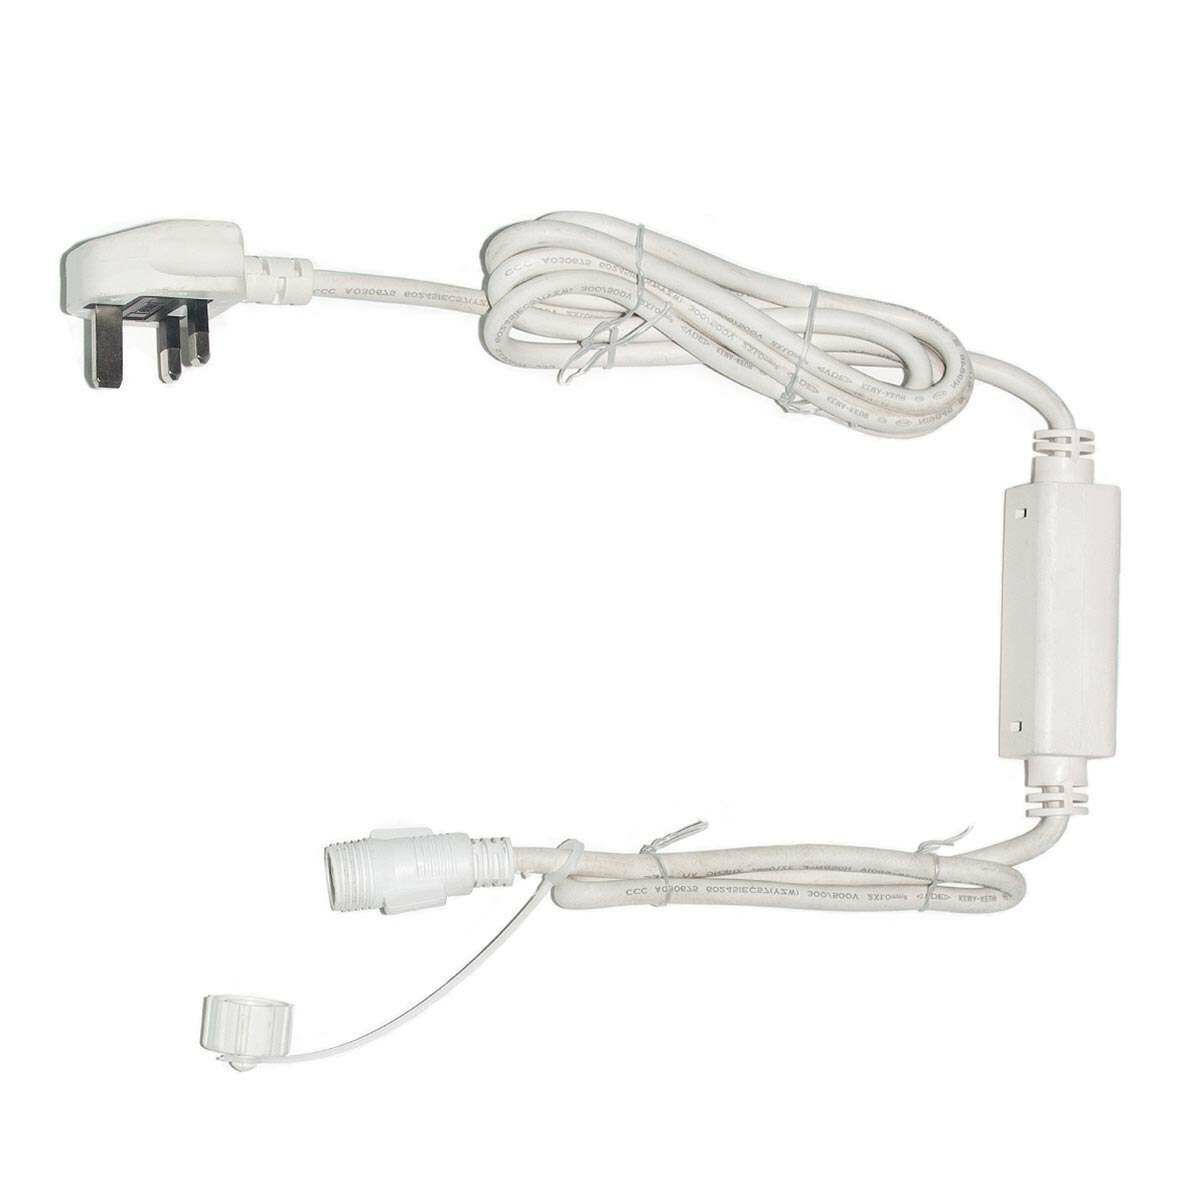 ConnectPro 2m White Starter Cable - Powers up to 7600 LEDs image 1